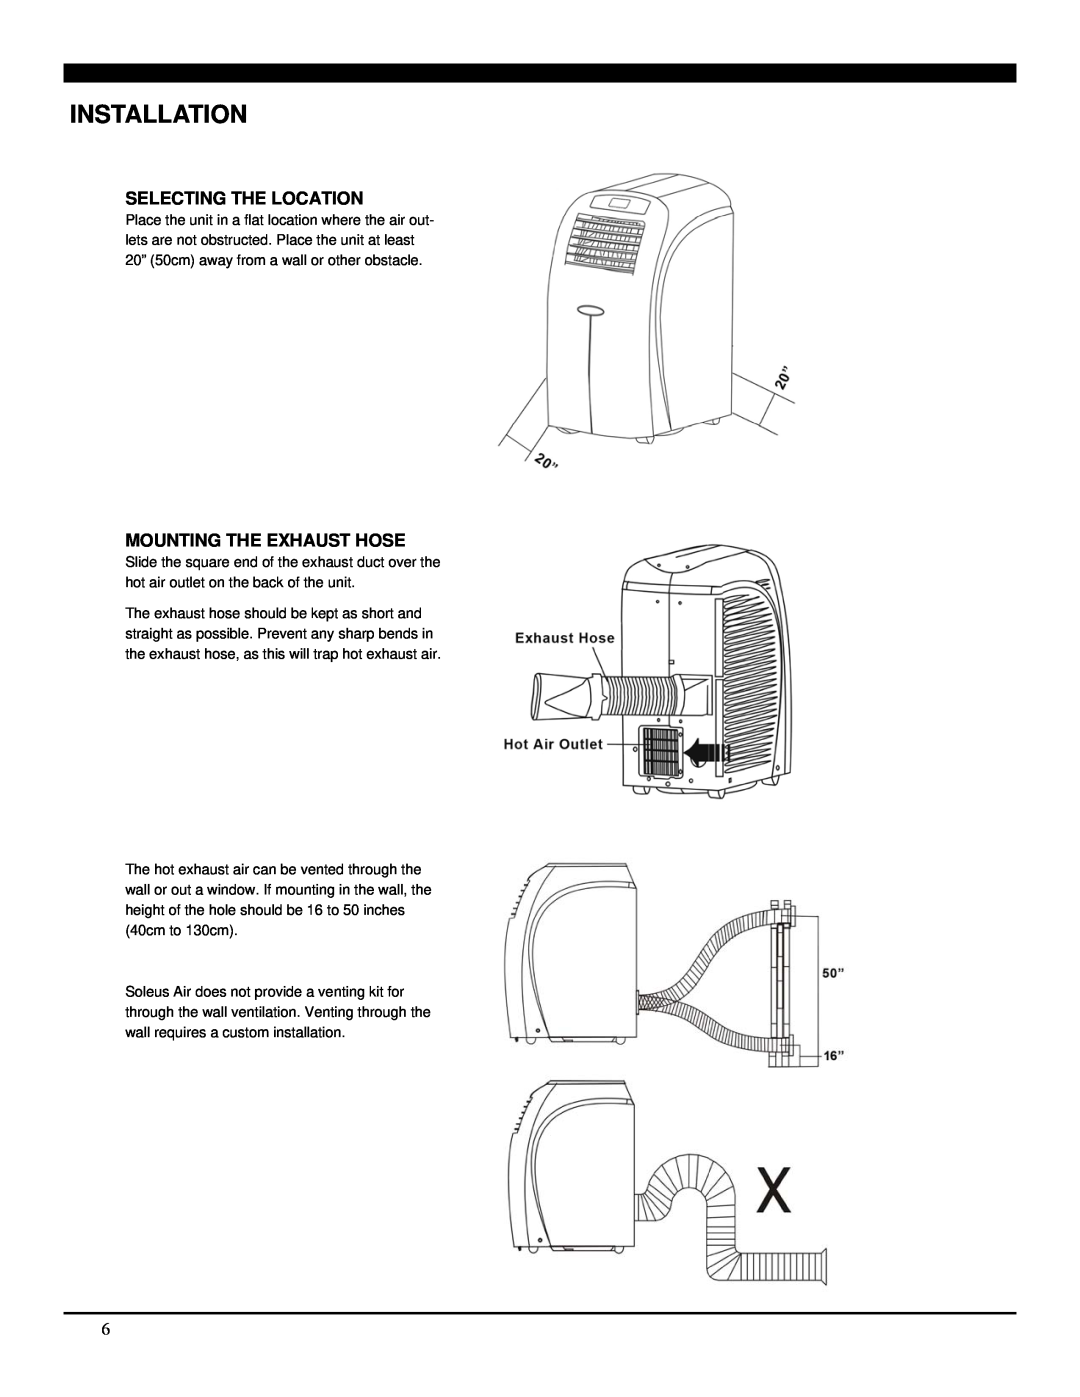 Soleus Air PH-3-12R-03 operating instructions Installation, Selecting The Location, Mounting The Exhaust Hose 